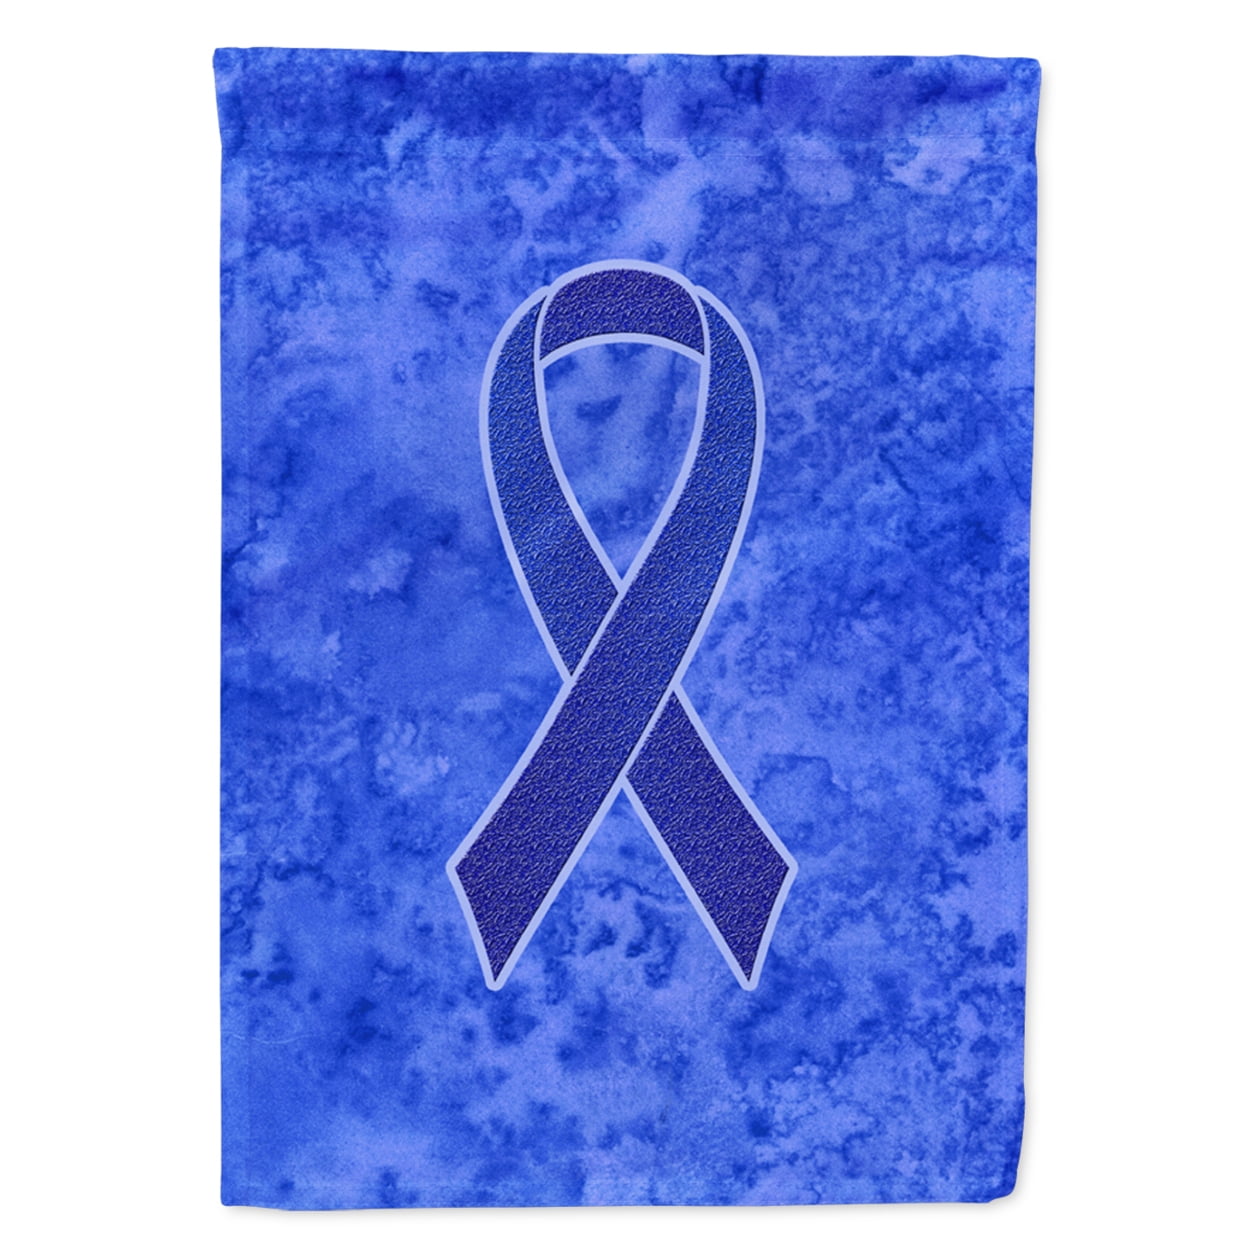 Dark Blue Ribbon for Colon Cancer and Colorectal Cancer